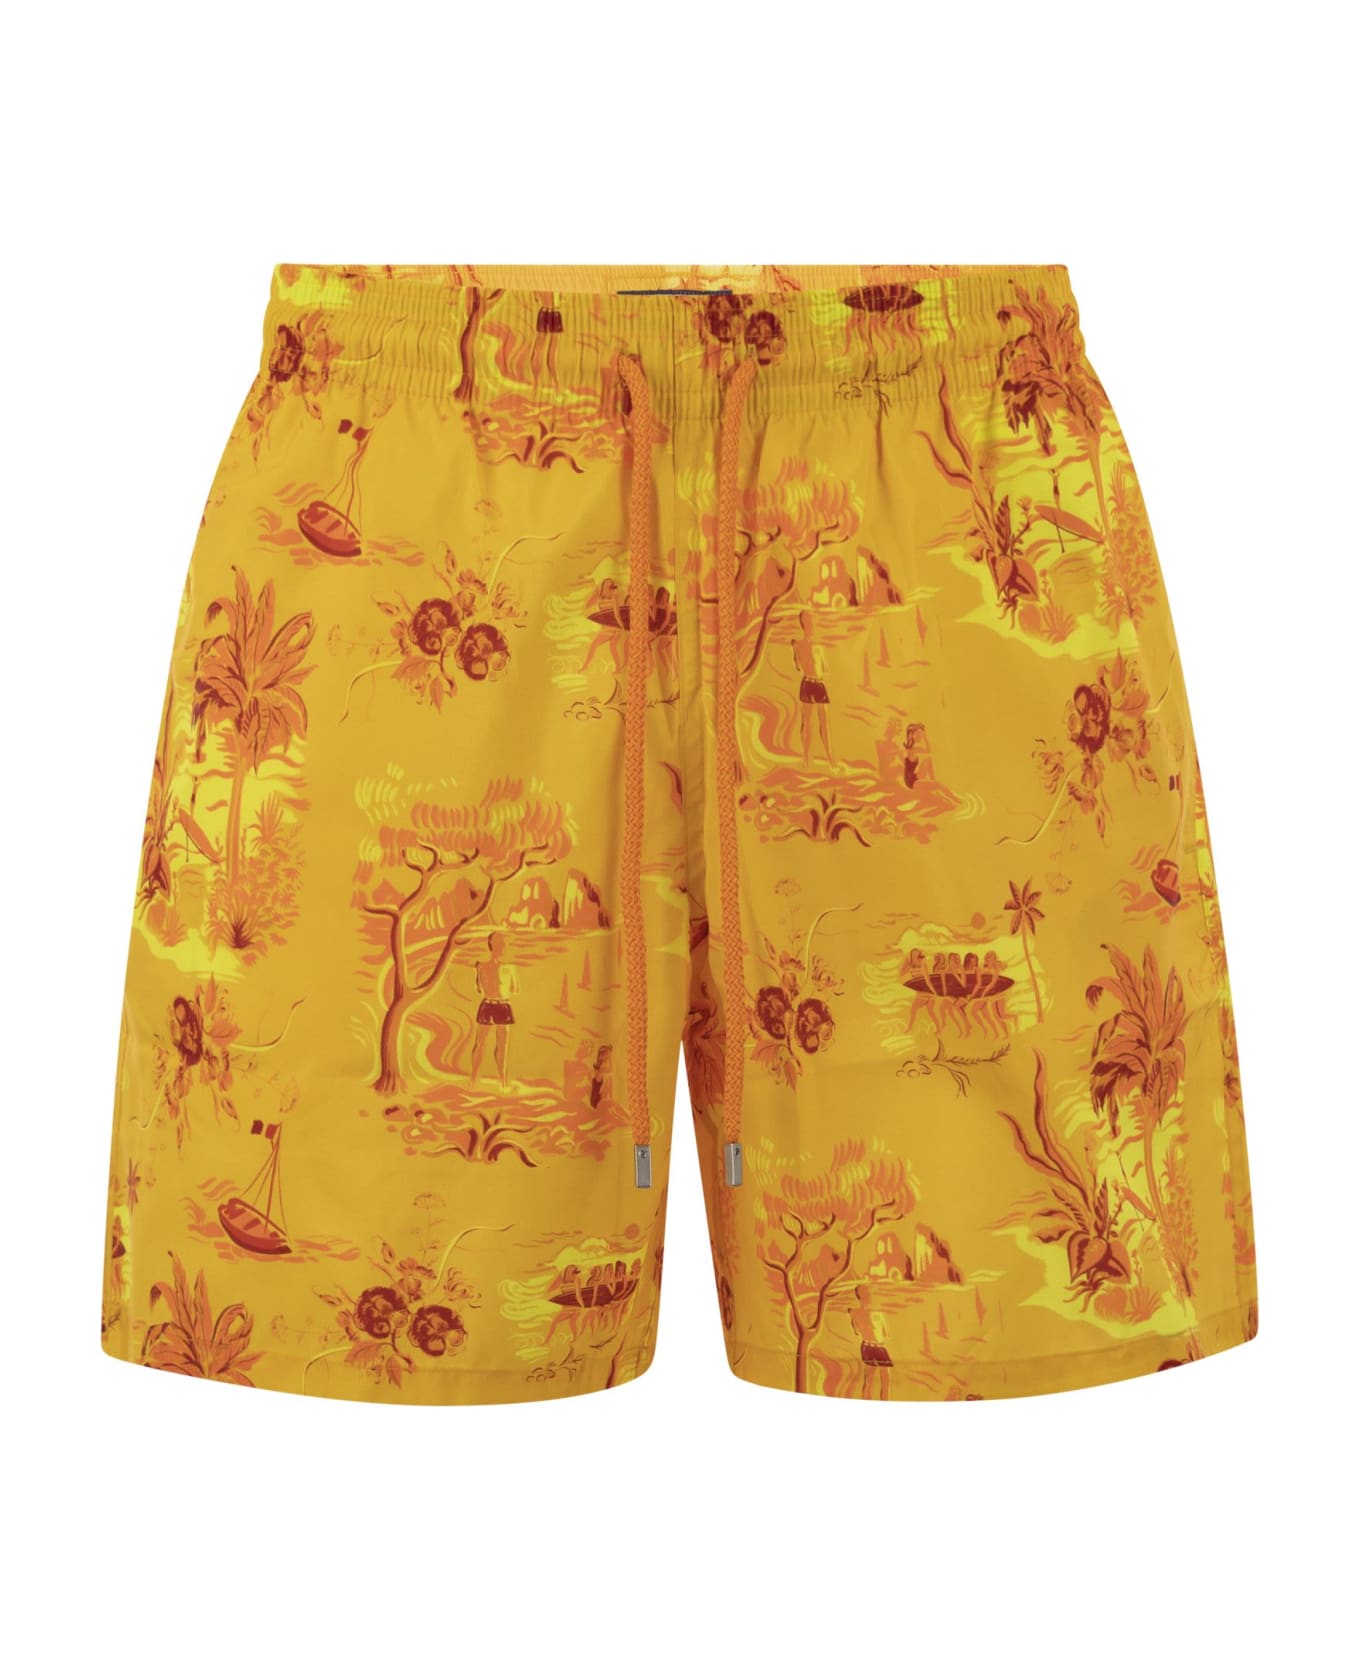 Vilebrequin Ultralight And Foldable Beach Shorts - Yellow